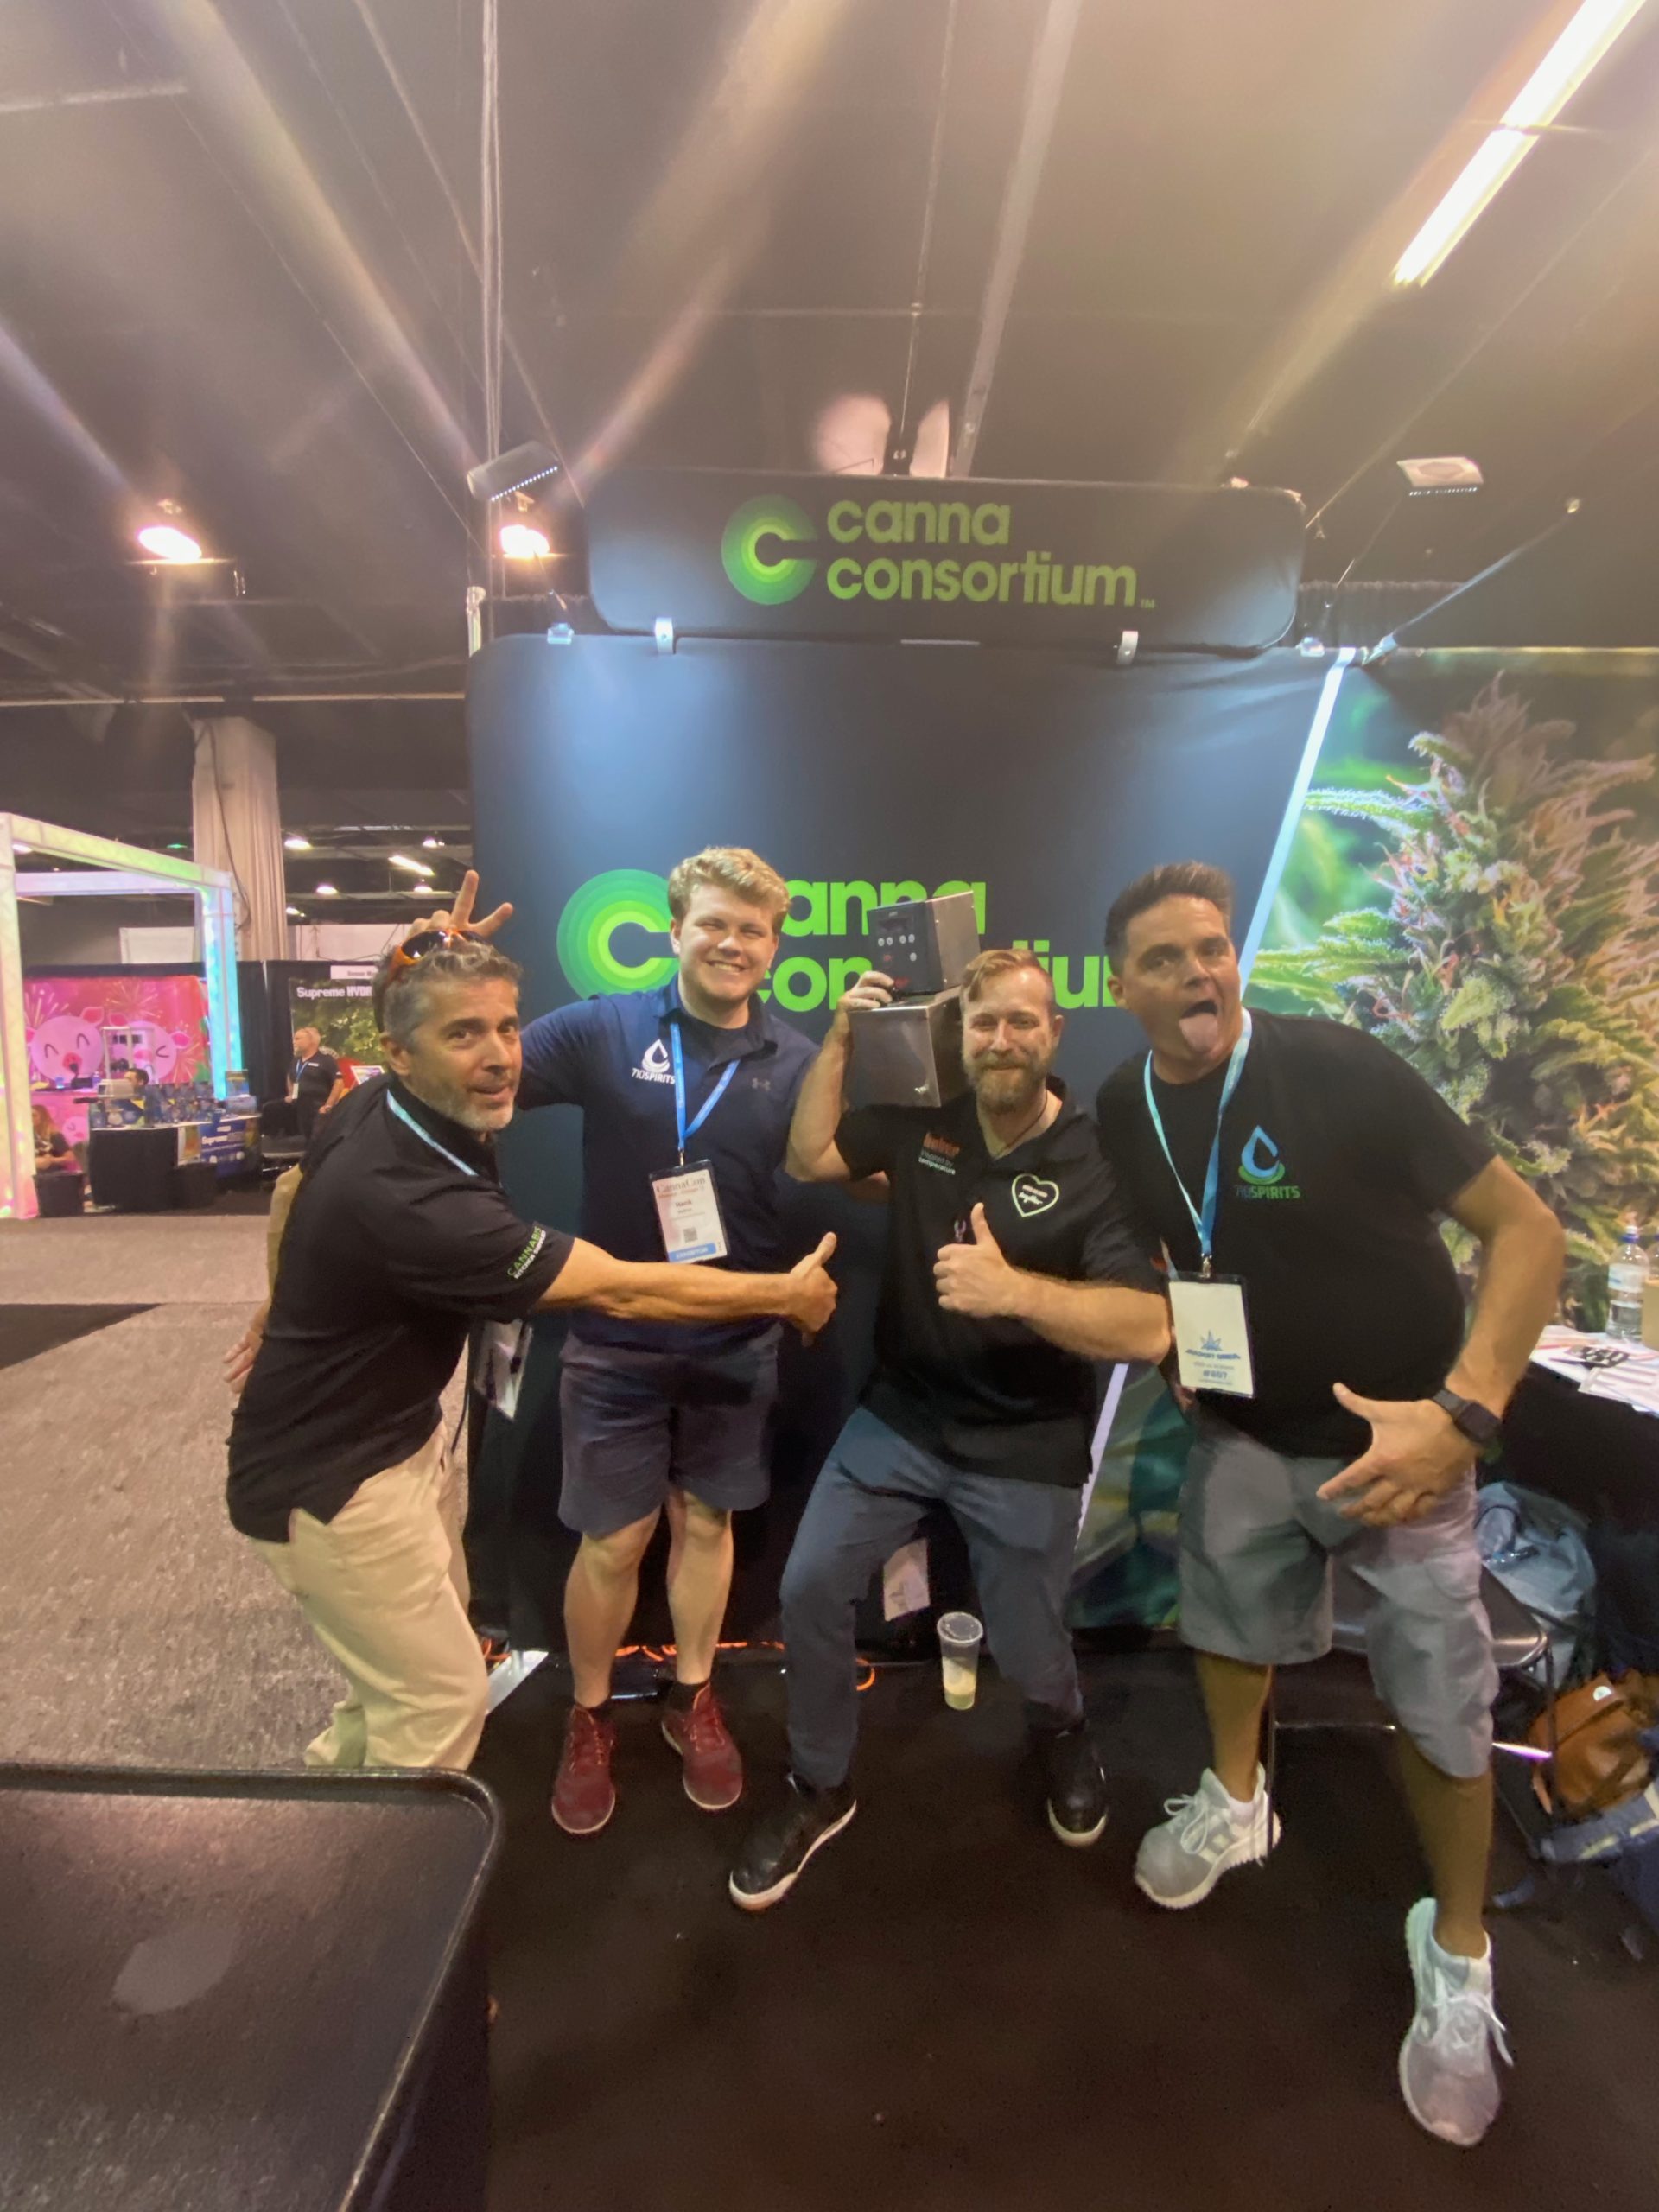 Featured image for “How to Effectively Market your Business at Cannabis Trade Shows”